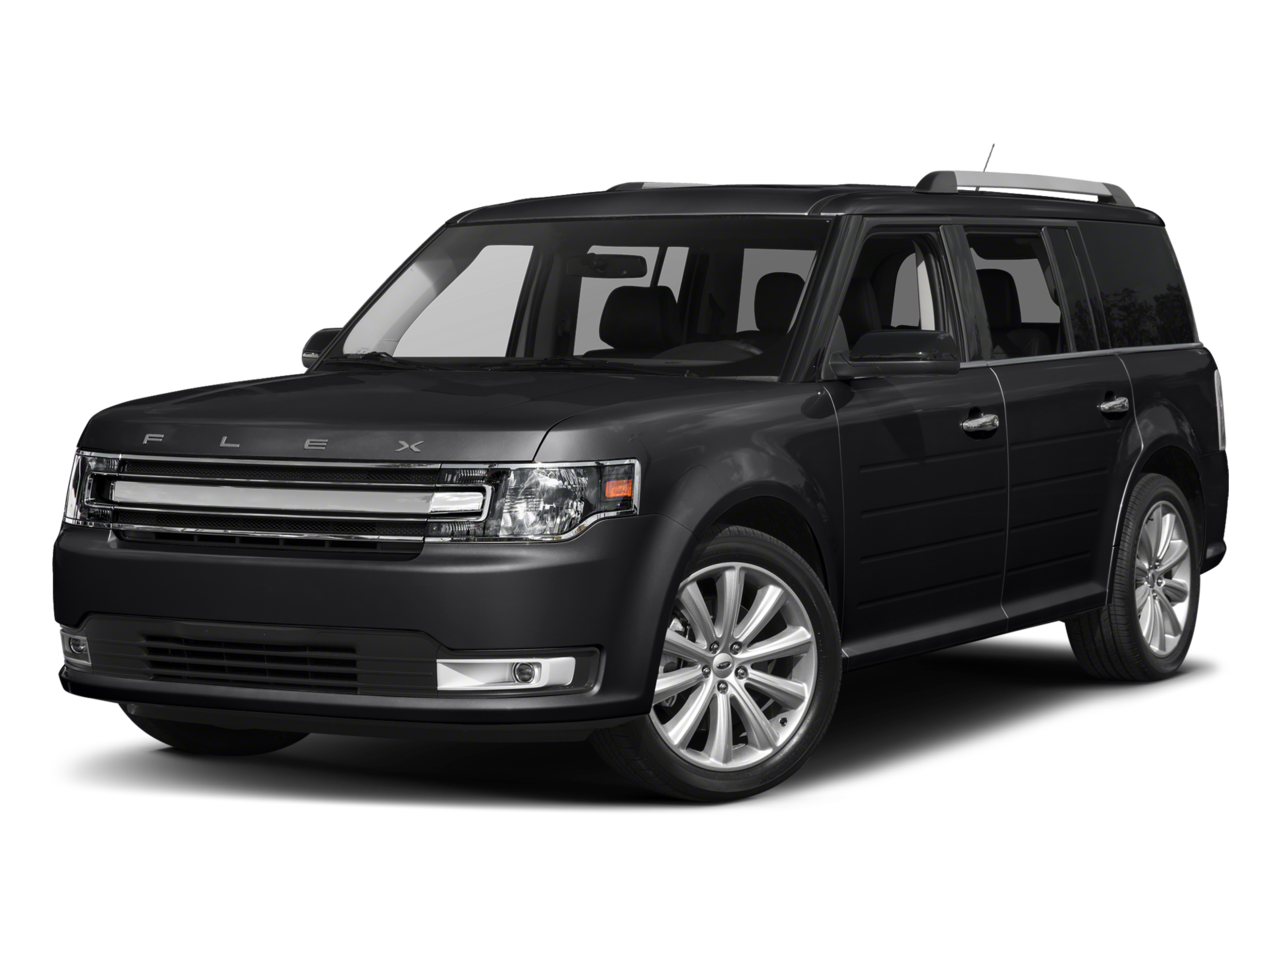 2017 Ford Flex Repair: Service and Maintenance Cost